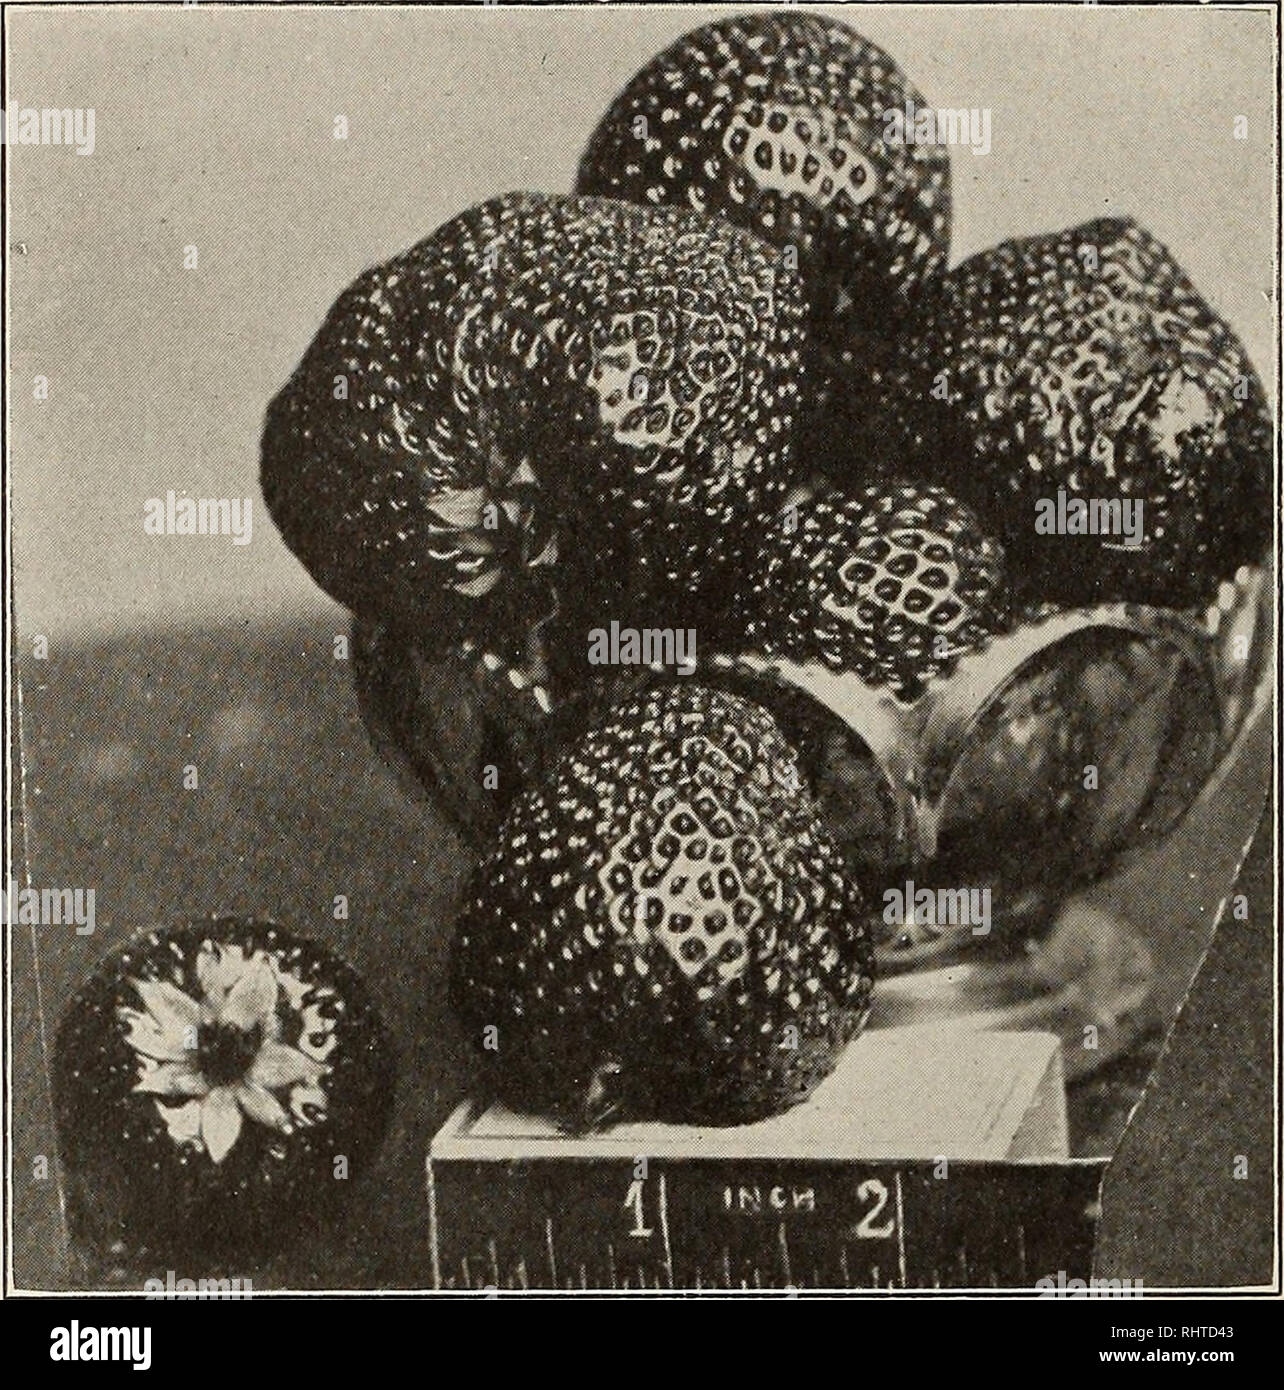 . Better fruit. Fruit-culture. Page 70 BETTER FRUIT October H M M &lt;J % n o &lt; M 03 M Eh. GOODELL BERRY Greatest of all known varieties. Has size, quality, color, sweetness and aroma of wild berry. Yield immense; $500 worth of berries marketed from half acre. Write for circular and prices. SURPLUS OF 1,011,621 TREES APPLE Rome Beauty 114,275 Winesap 141,833 Stayman Winesap 17,064 j Newtown Pippin 106,278 m Jonathan 140,212 tZj Wagener 57,690 &quot; Delicious 25,499 H] Grimes Golden 38,093 H Spitzenberg 54,301 § Arkansas Black 2,450 ^ Mcintosh 56,646 Jj Variety List 13,645 PEACH J[J Elberta Stock Photo